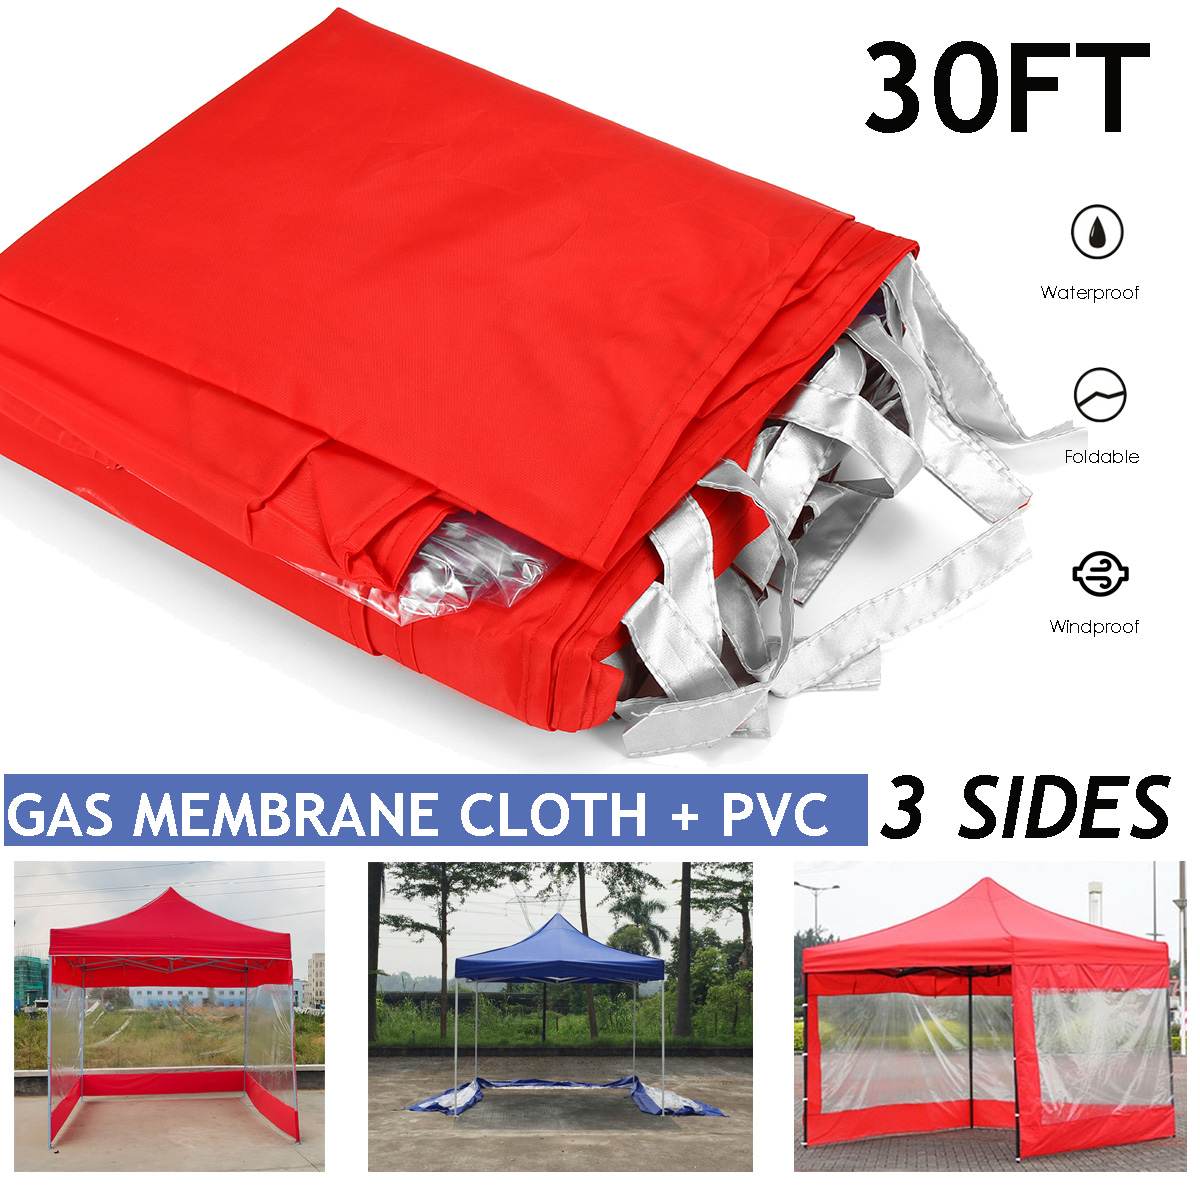 30ftx7ft Oxford Cloth Gazebos Side Walls Party Tent 9x2m Waterproof Garden Patio Outdoor Canopy Shelter Sunshade Awning Shade